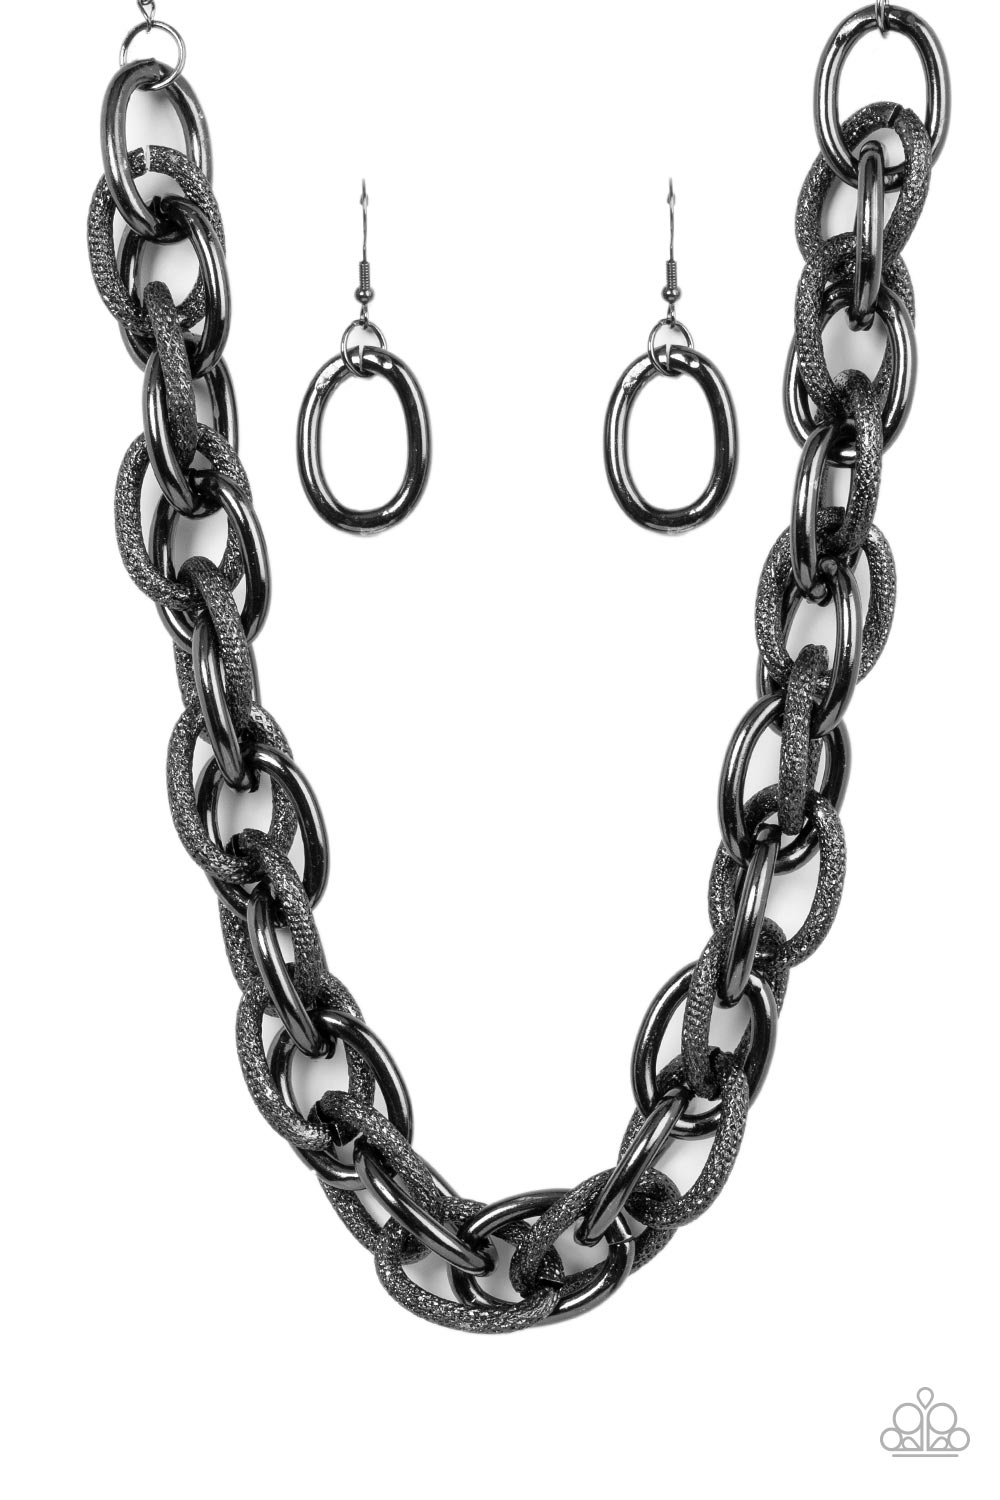 License to Chill Gunmetal Black Chain Necklace - Paparazzi Accessories- lightbox - CarasShop.com - $5 Jewelry by Cara Jewels